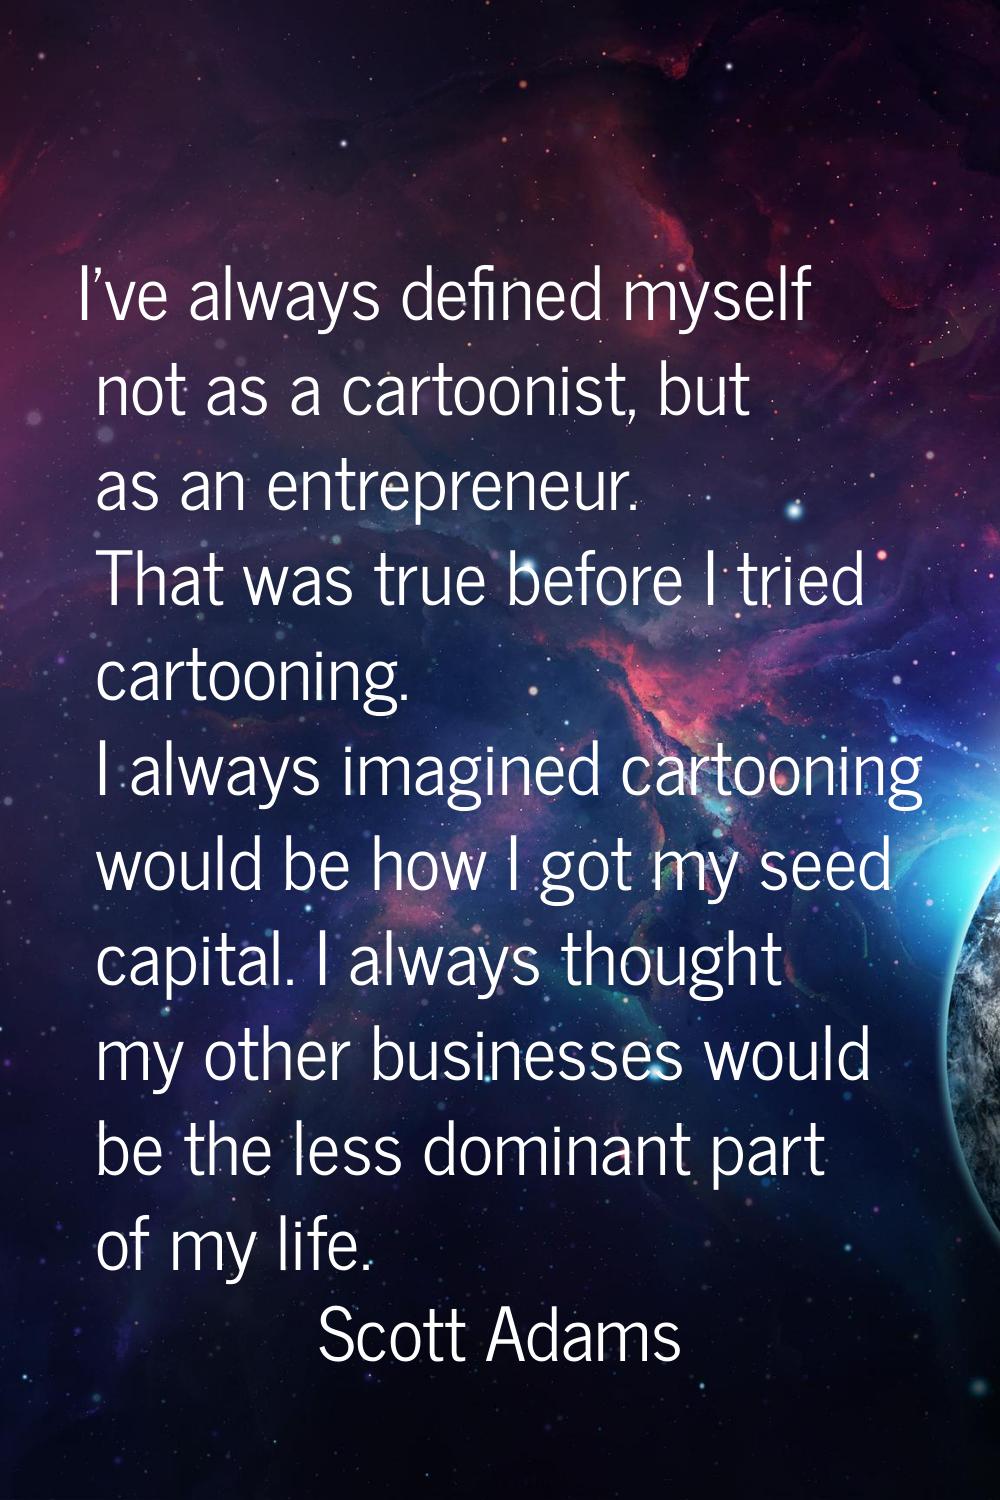 I've always defined myself not as a cartoonist, but as an entrepreneur. That was true before I trie